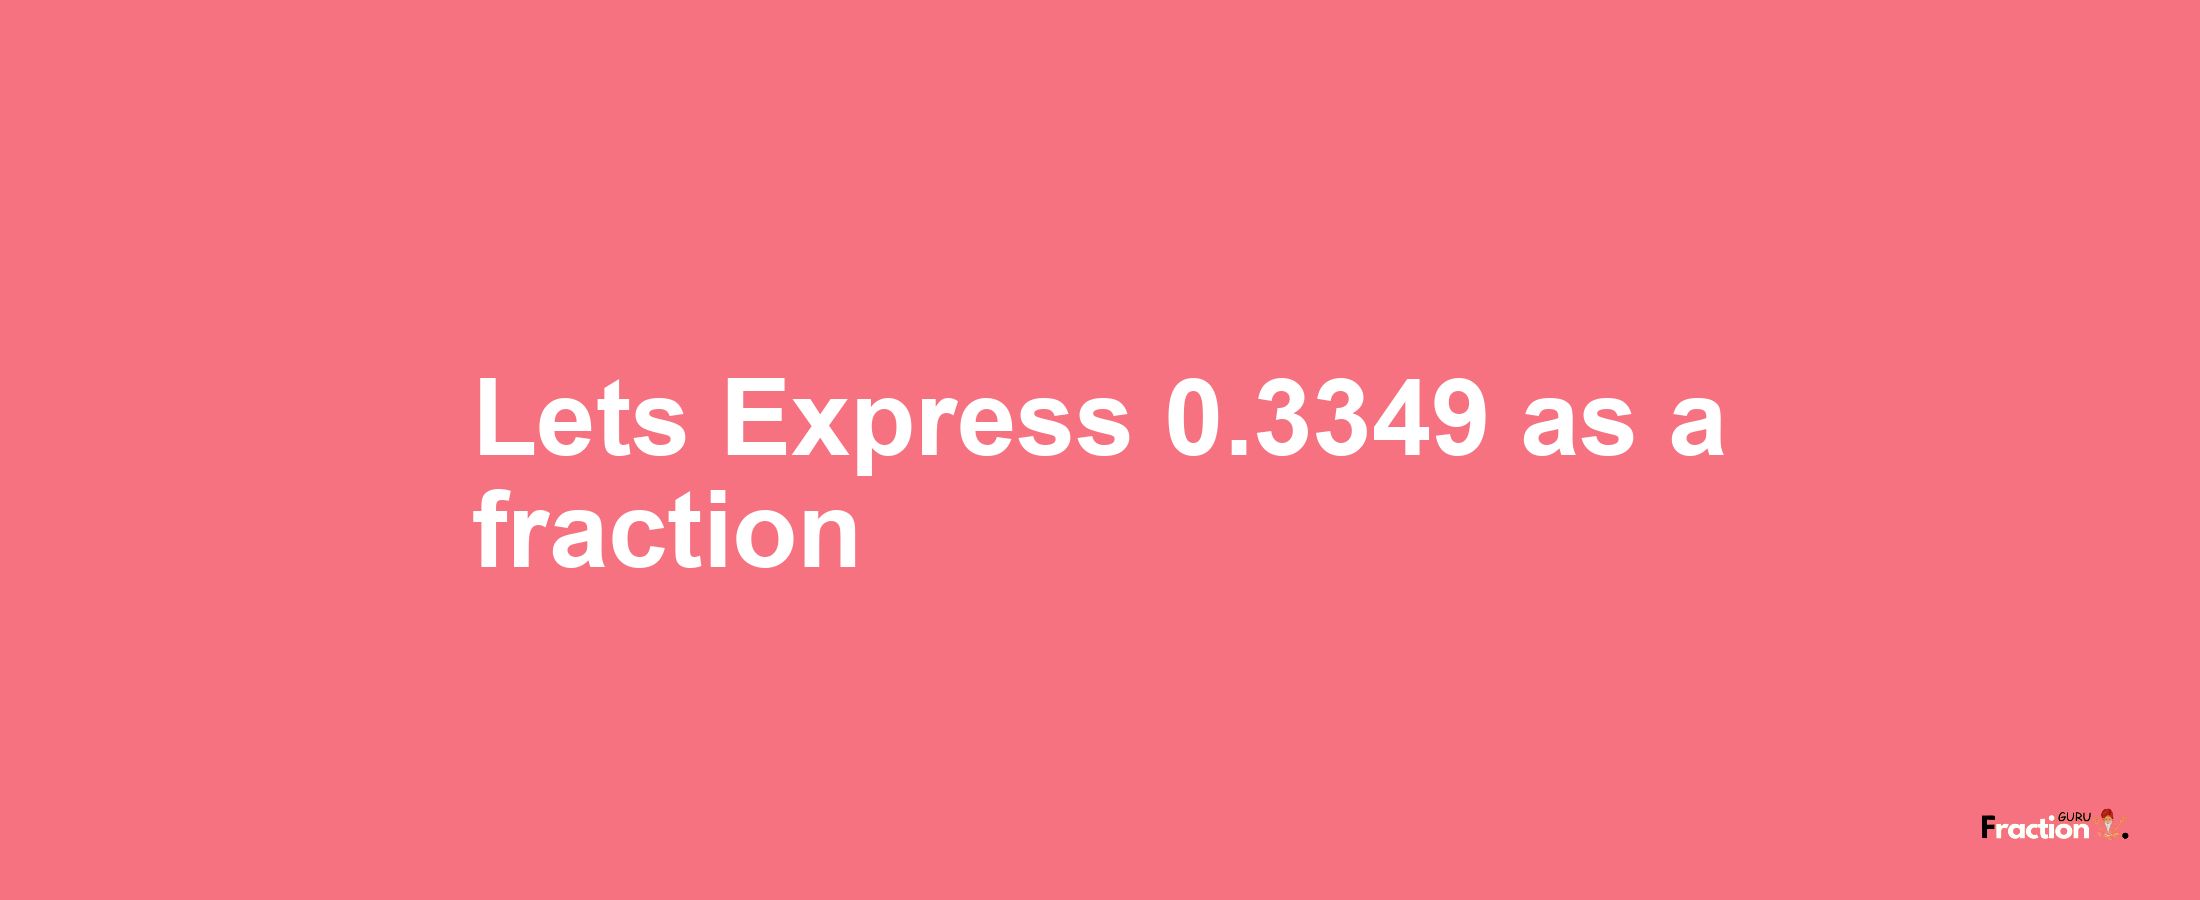 Lets Express 0.3349 as afraction